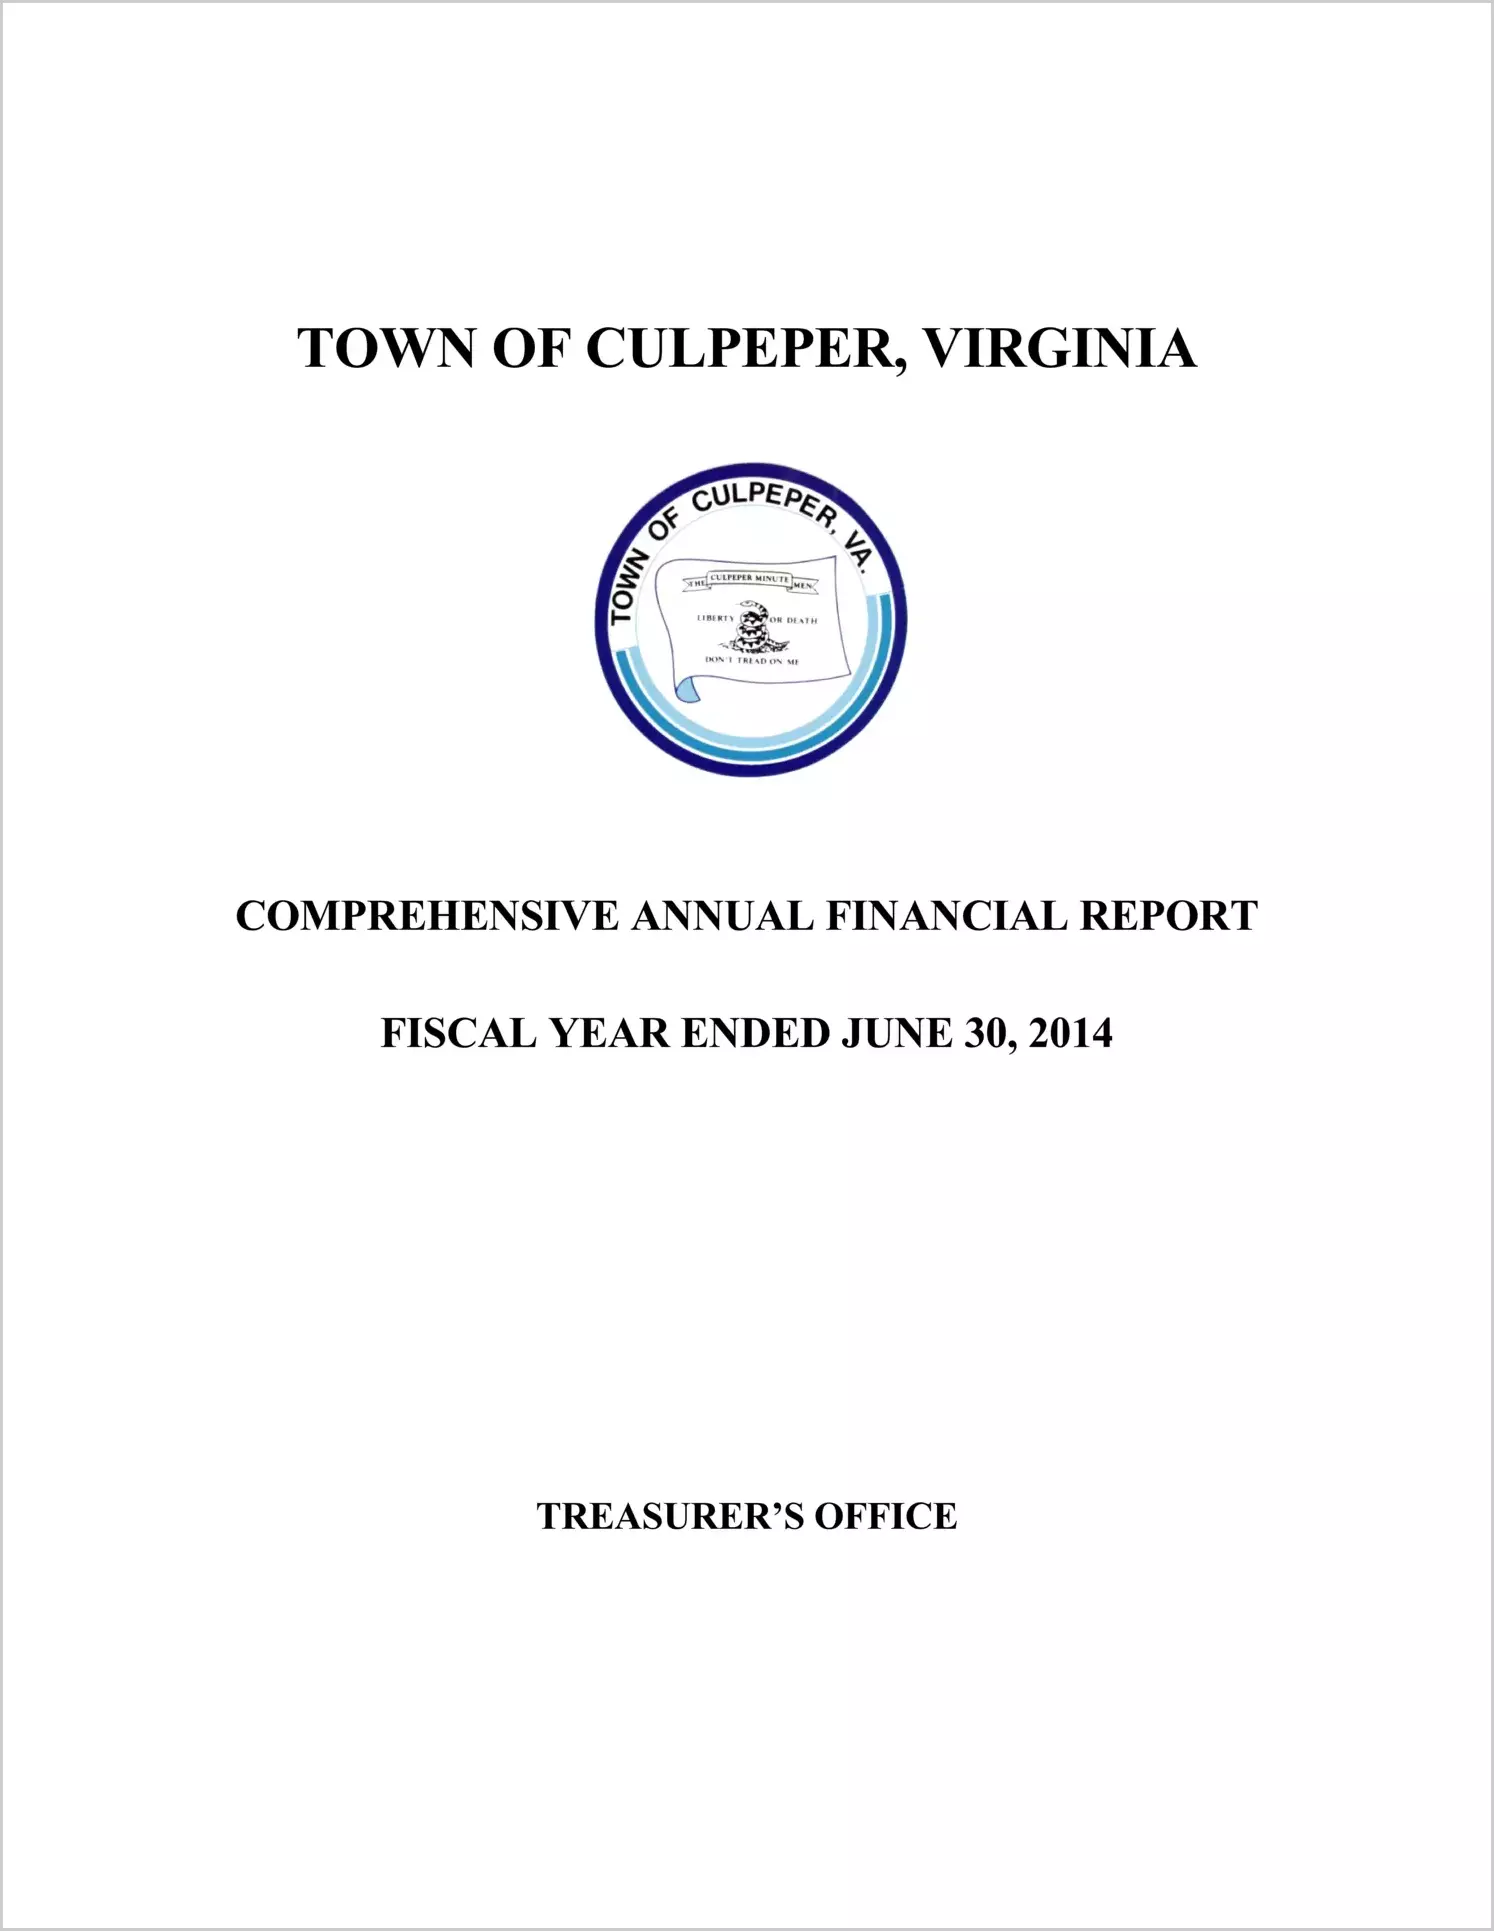 2014 Annual Financial Report for Town of Culpeper